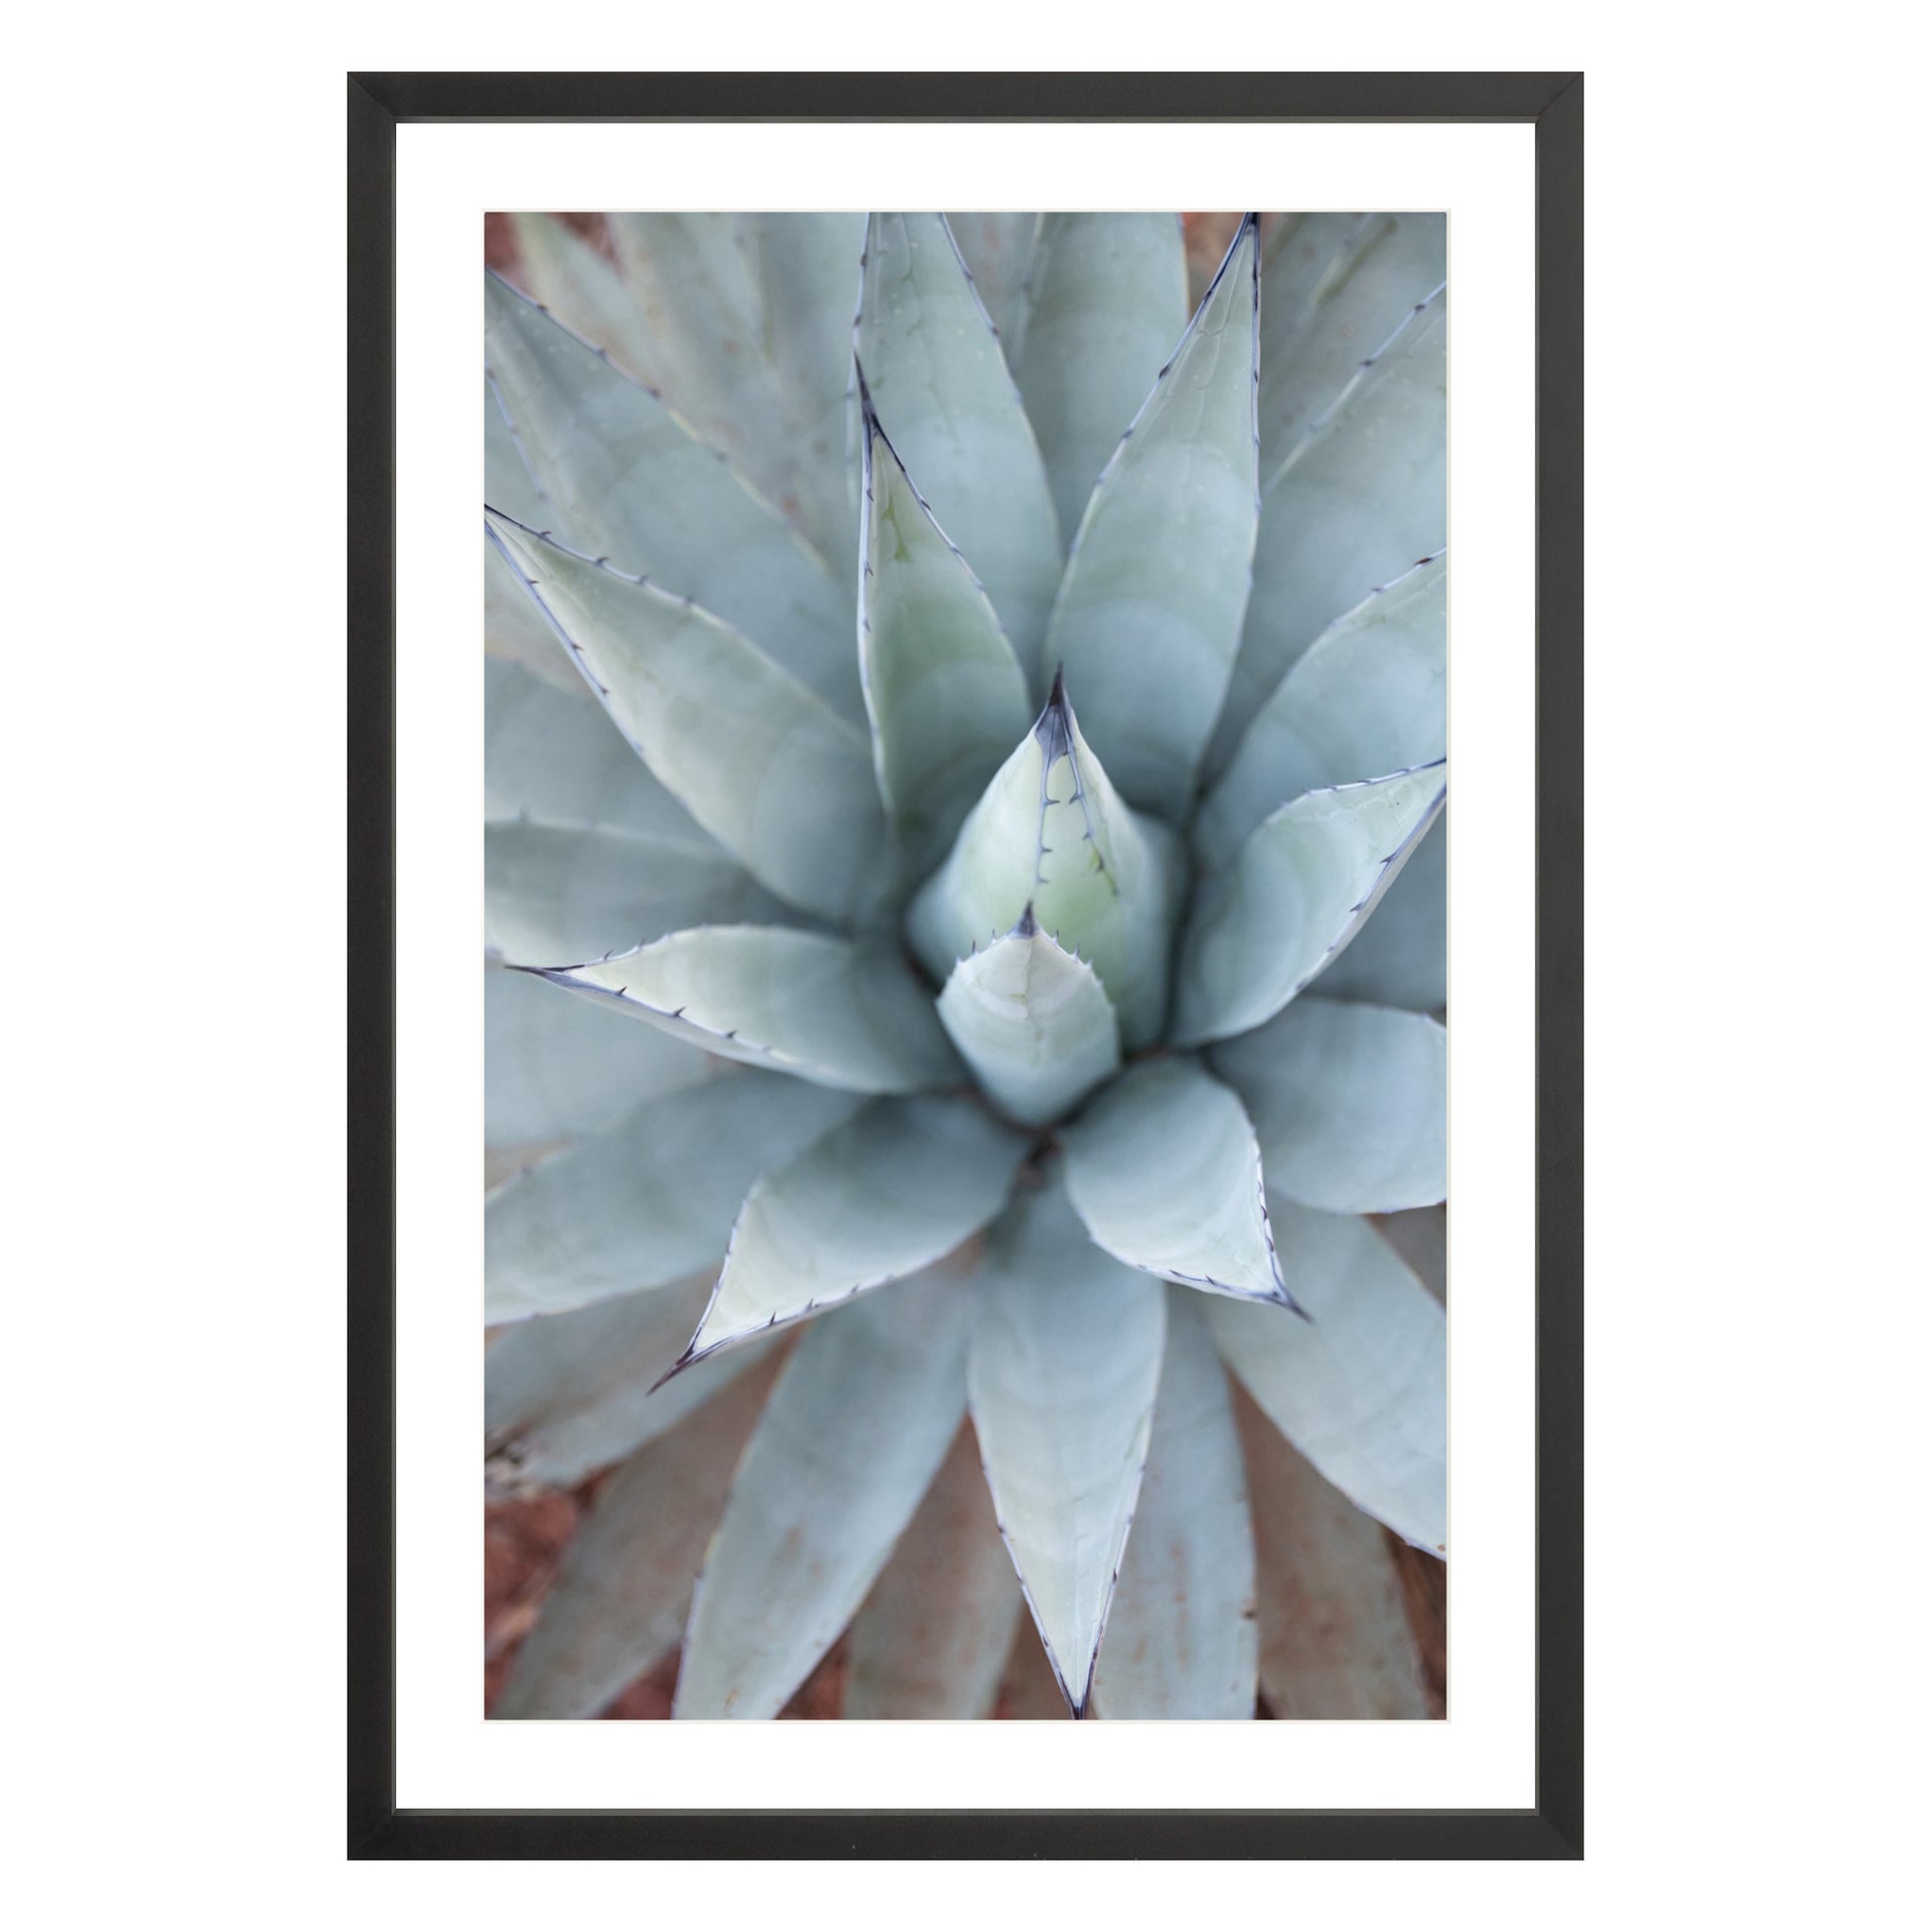 Photograph of agave plant framed in black with white mat